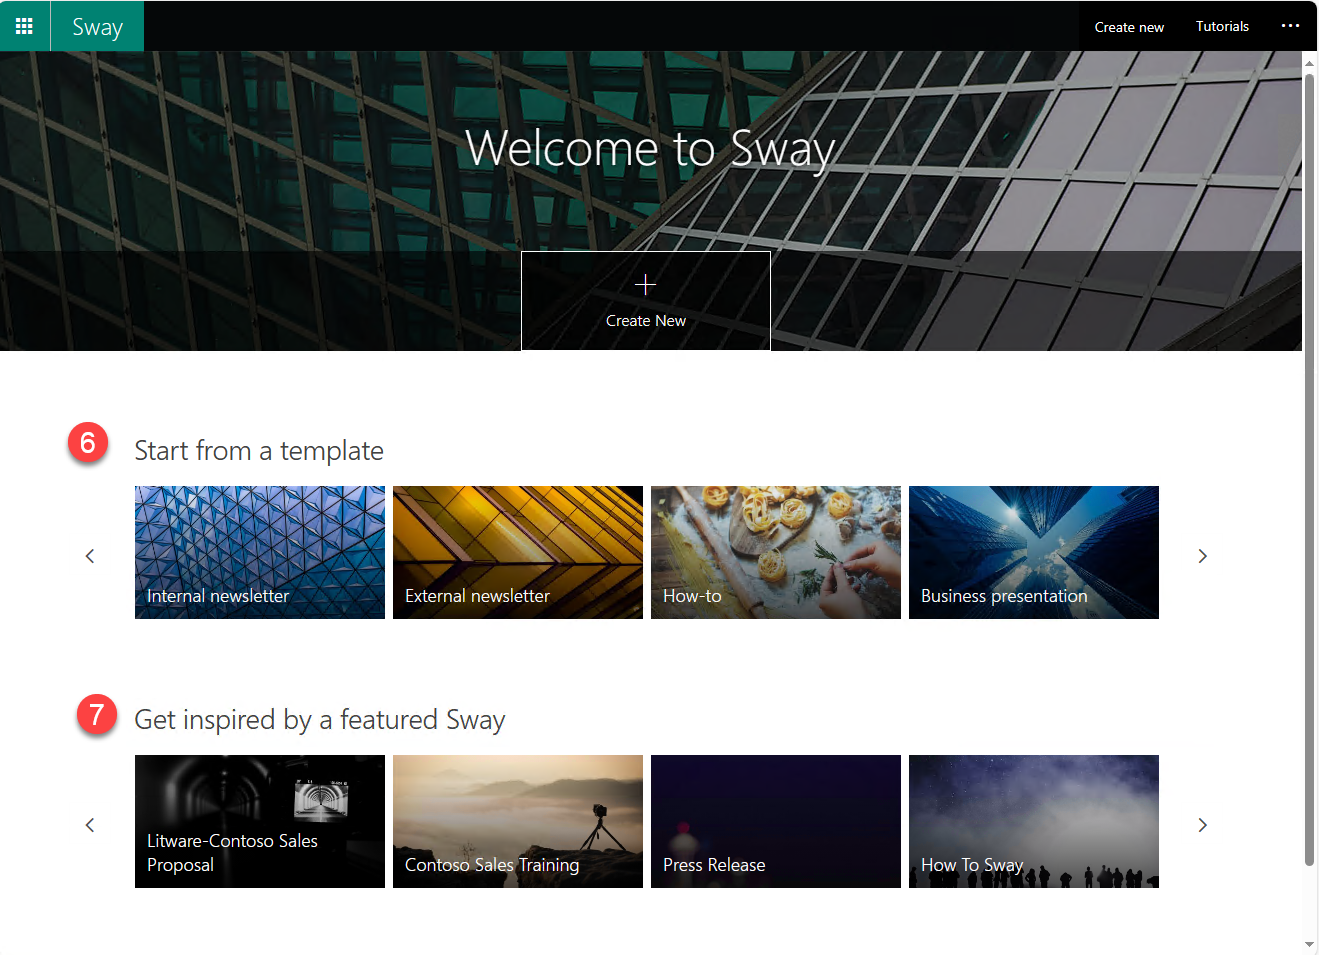 Screenshot of the Sway Welcome Screen with step indicators for the template (6) and inspiration sections (7). Visible template offerings include internal and external newsletters, how-to, and business presentation. Inspiration offerings include Litware-Contoso Sales Proposal, Contoso Sales Training, Press Release, and How to Sway.  